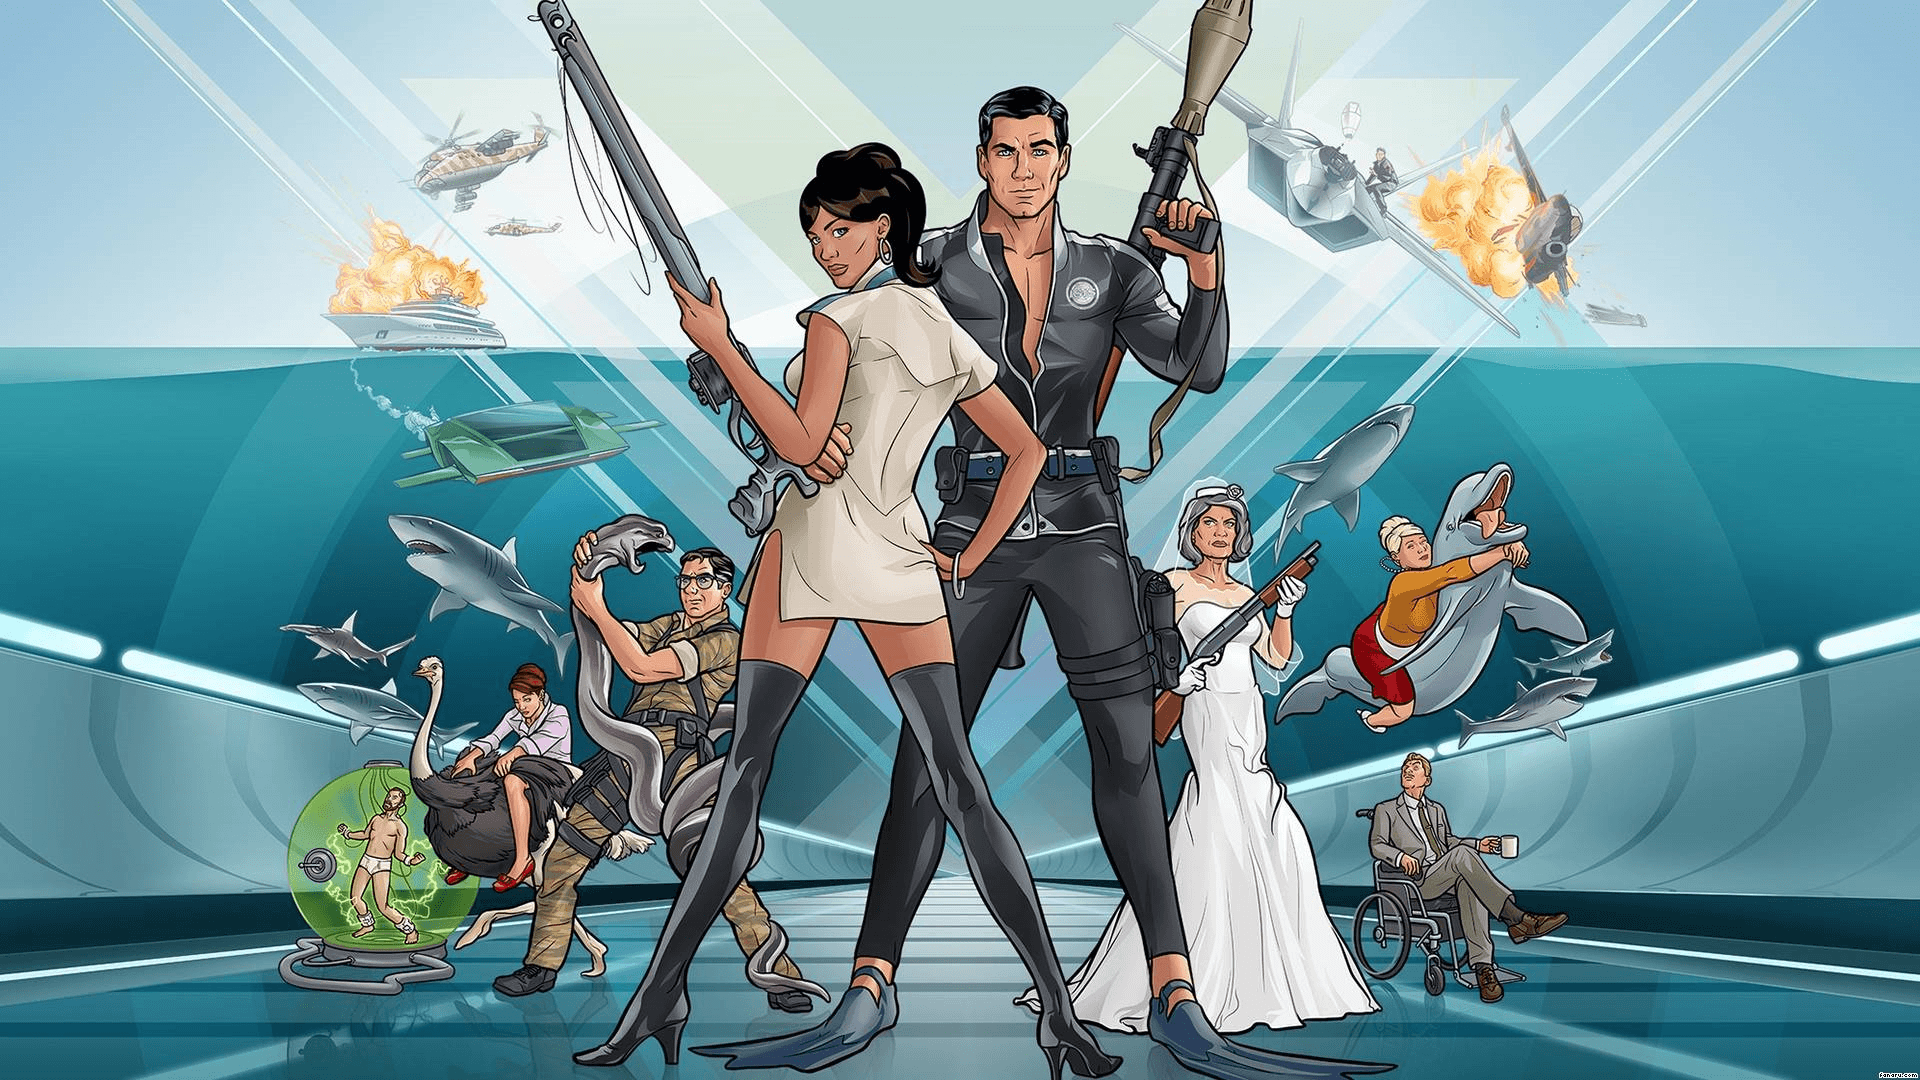 Hey guys! Does anyone have any good Archer wallpaper?